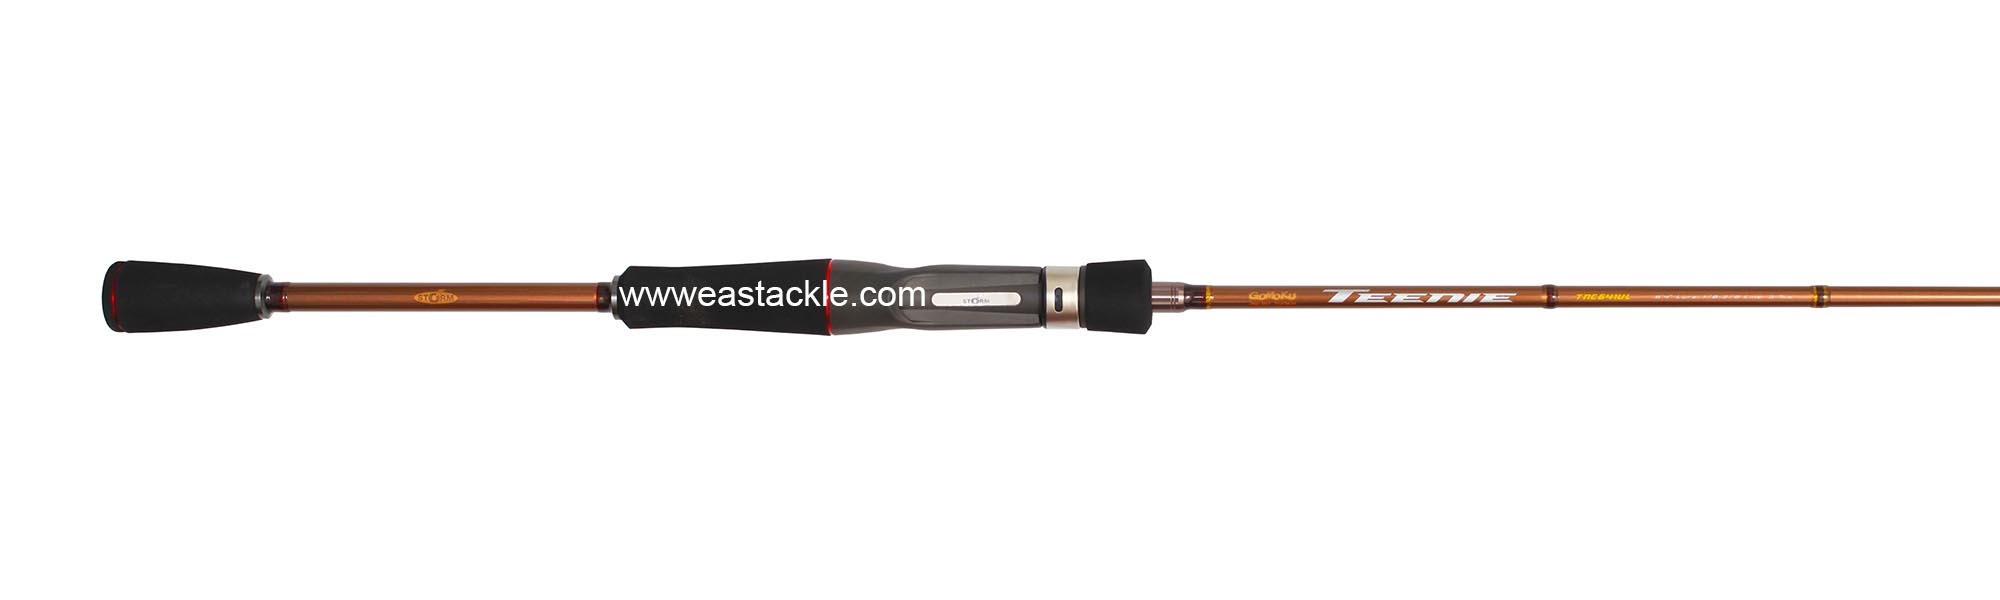 Storm - Teenie - TNC641UL - Bait Casting Rod - Butt to Stripper Guide (Top View) | Eastackle